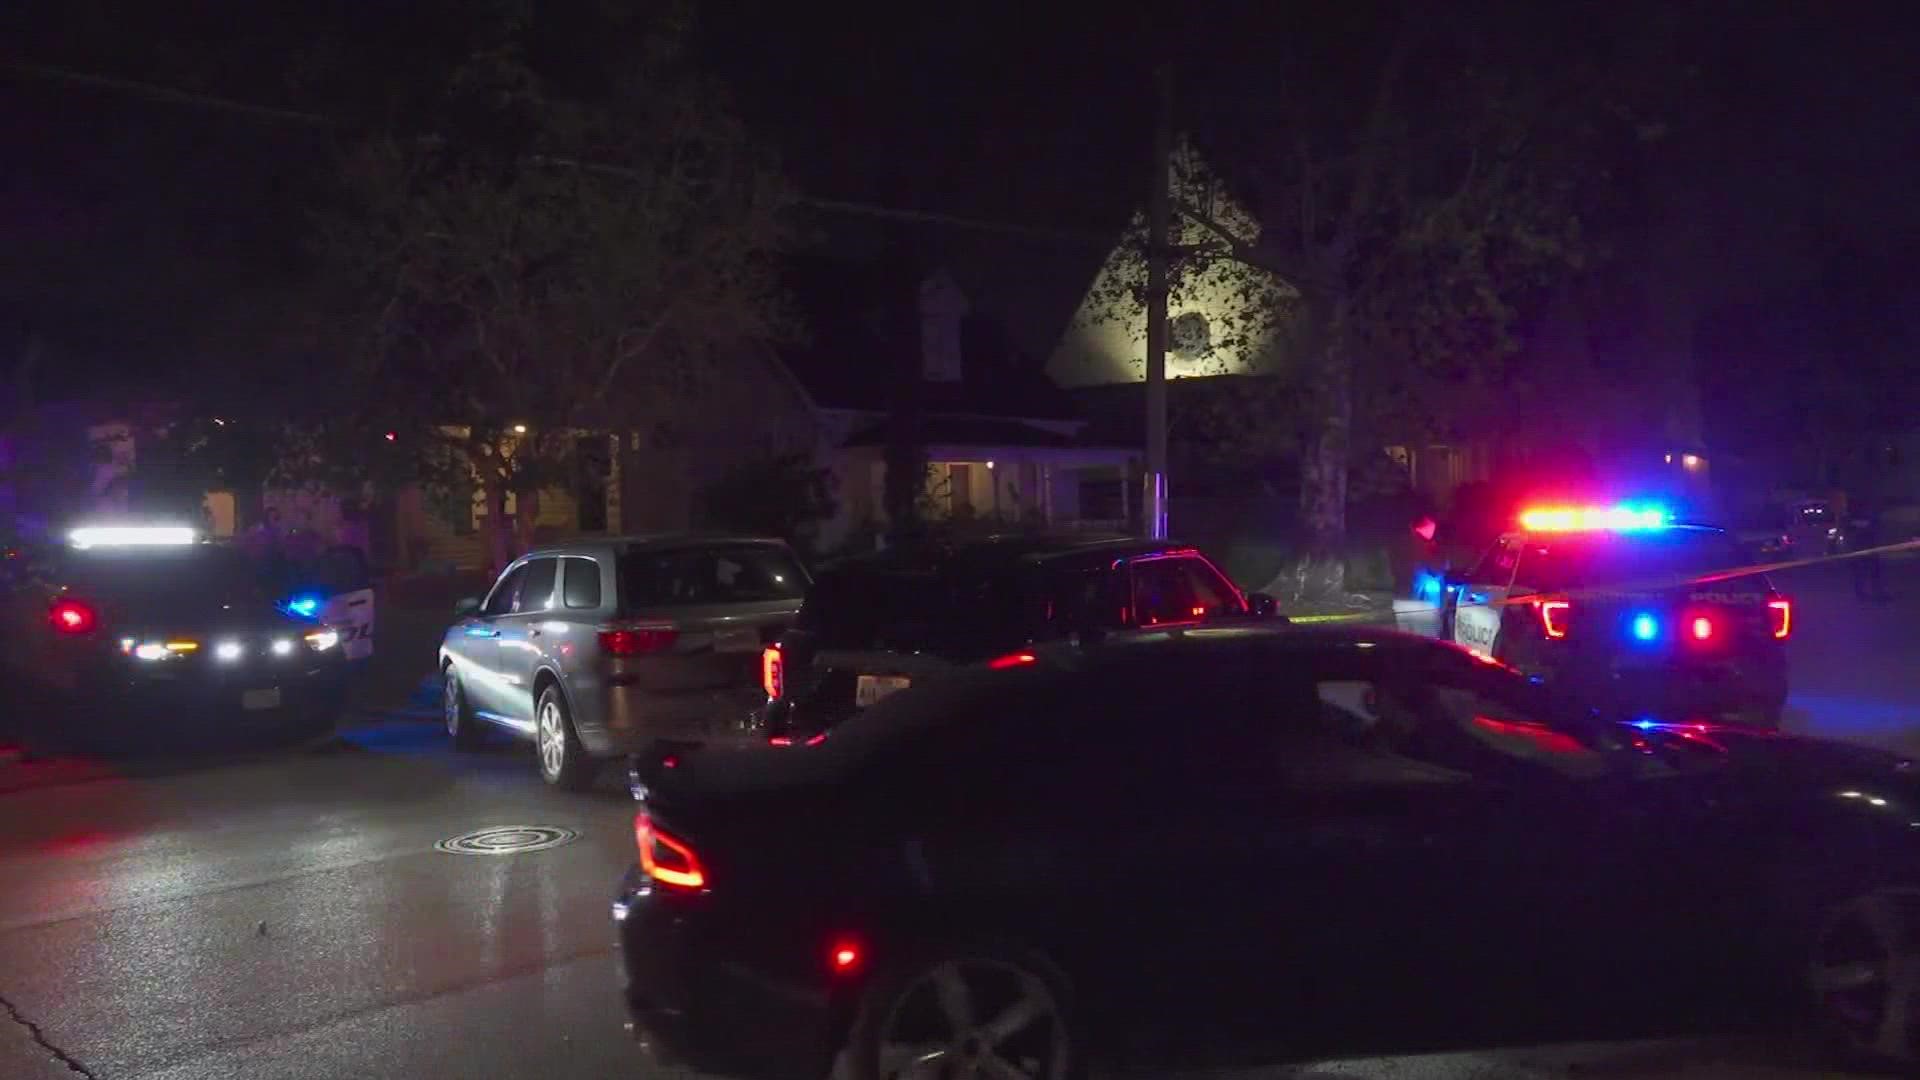 A man was shot multiple times and a 1-year-old child was grazed by a bullet Sunday night during a road rage shooting in north Houston, according to police.